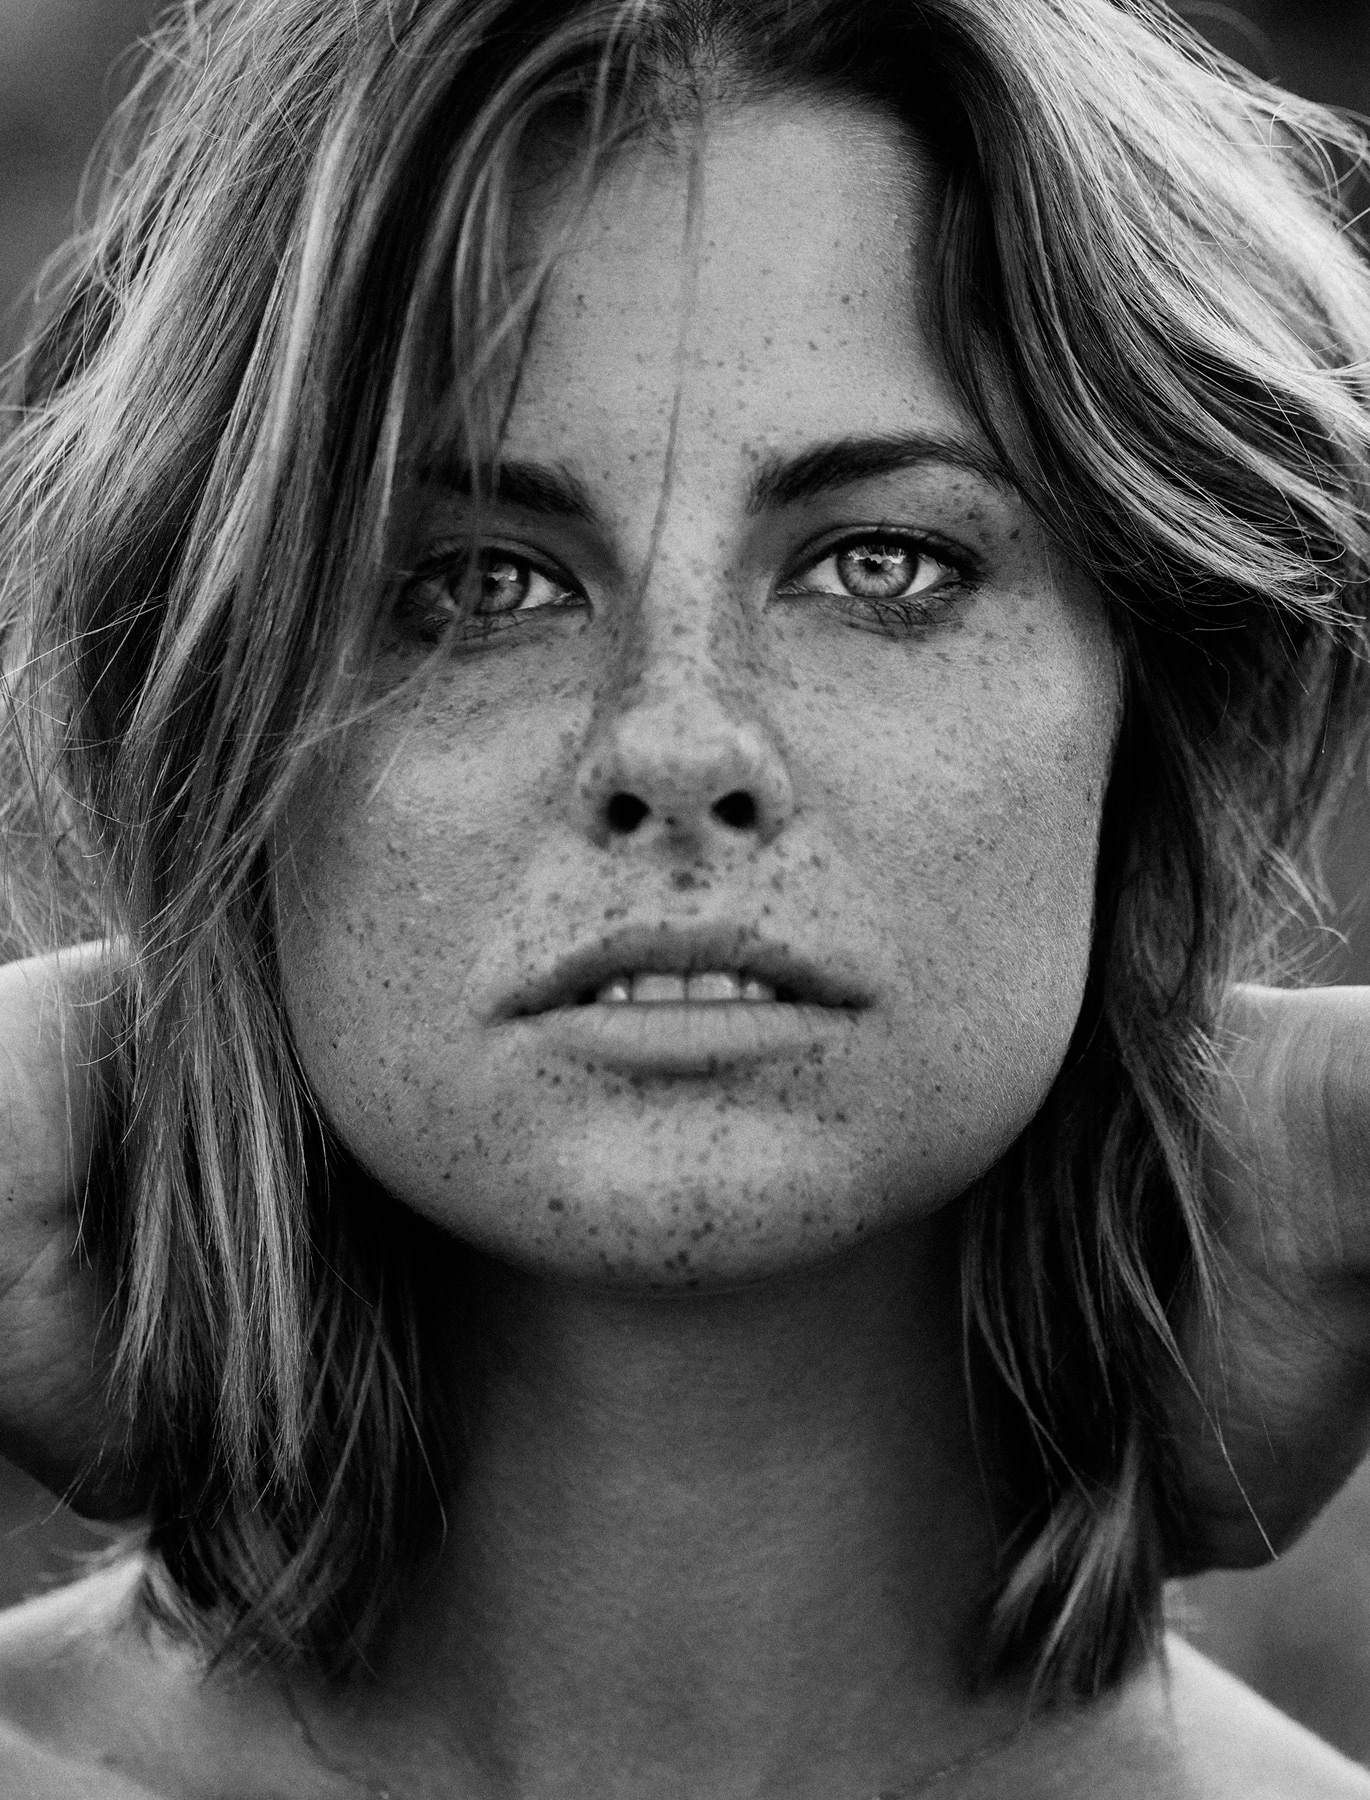 Carsten Witte - The Freckles Project